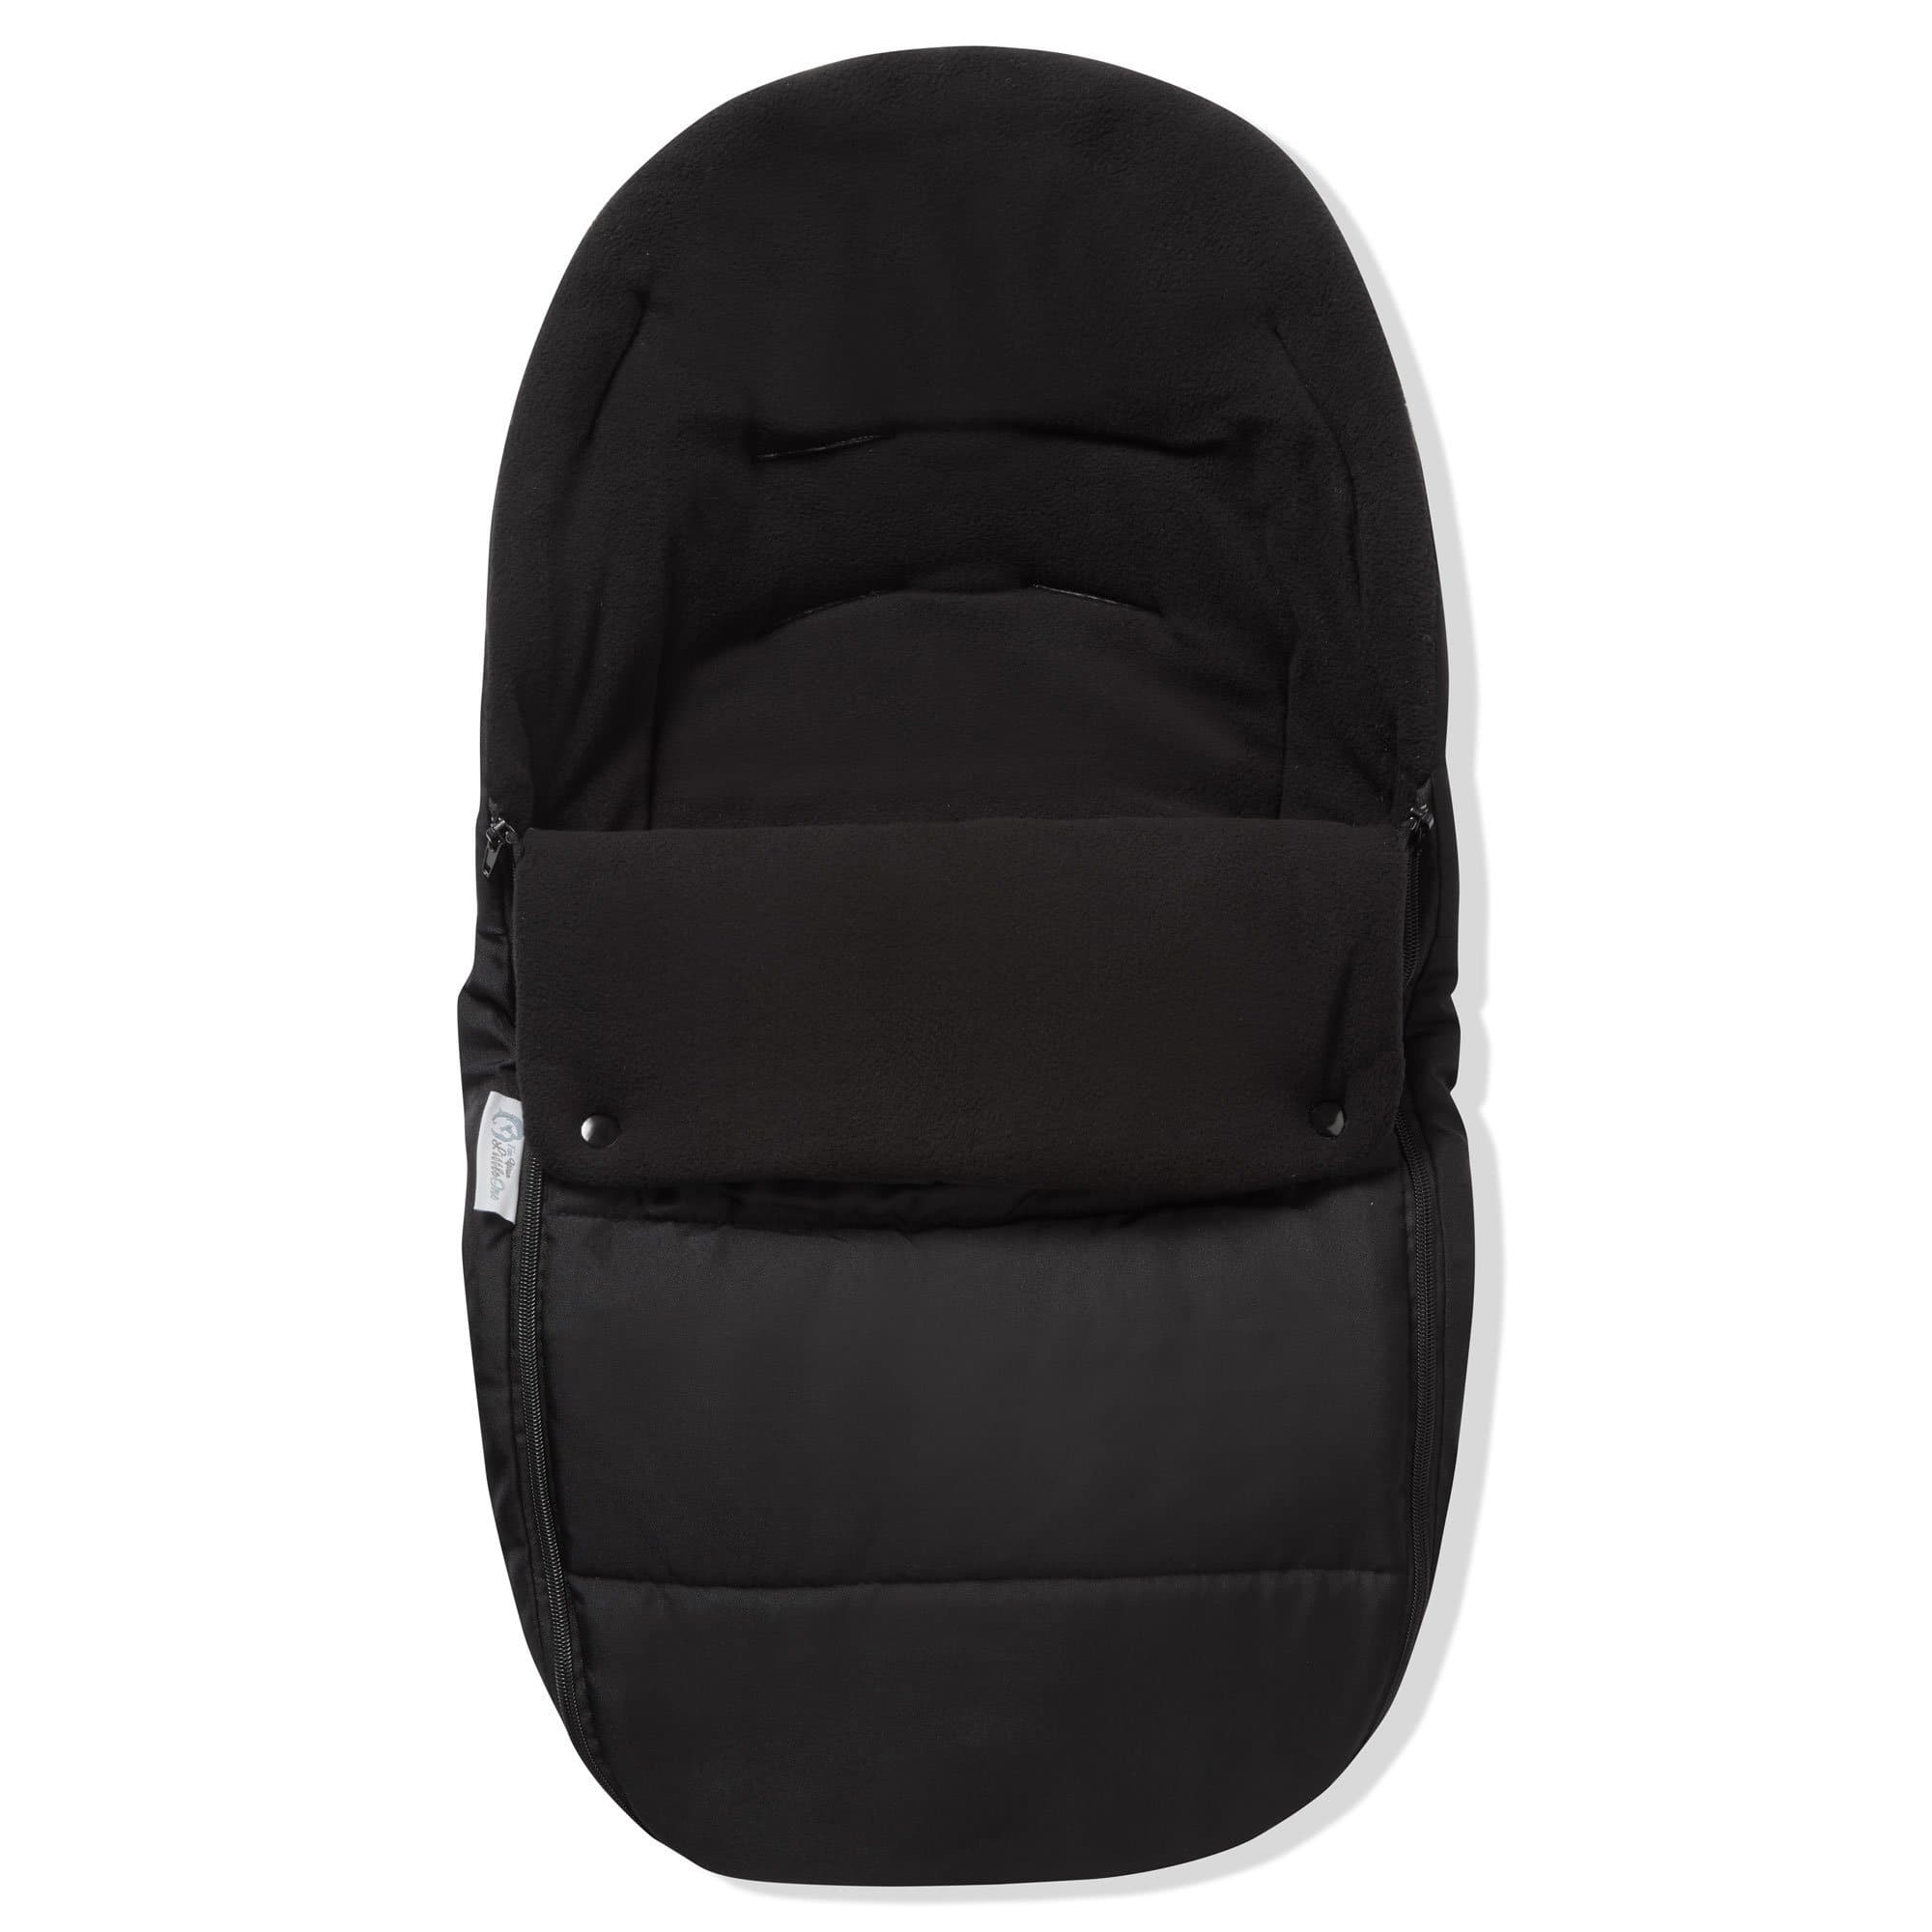 Premium Car Seat Footmuff / Cosy Toes Compatible with Nania - For Your Little One